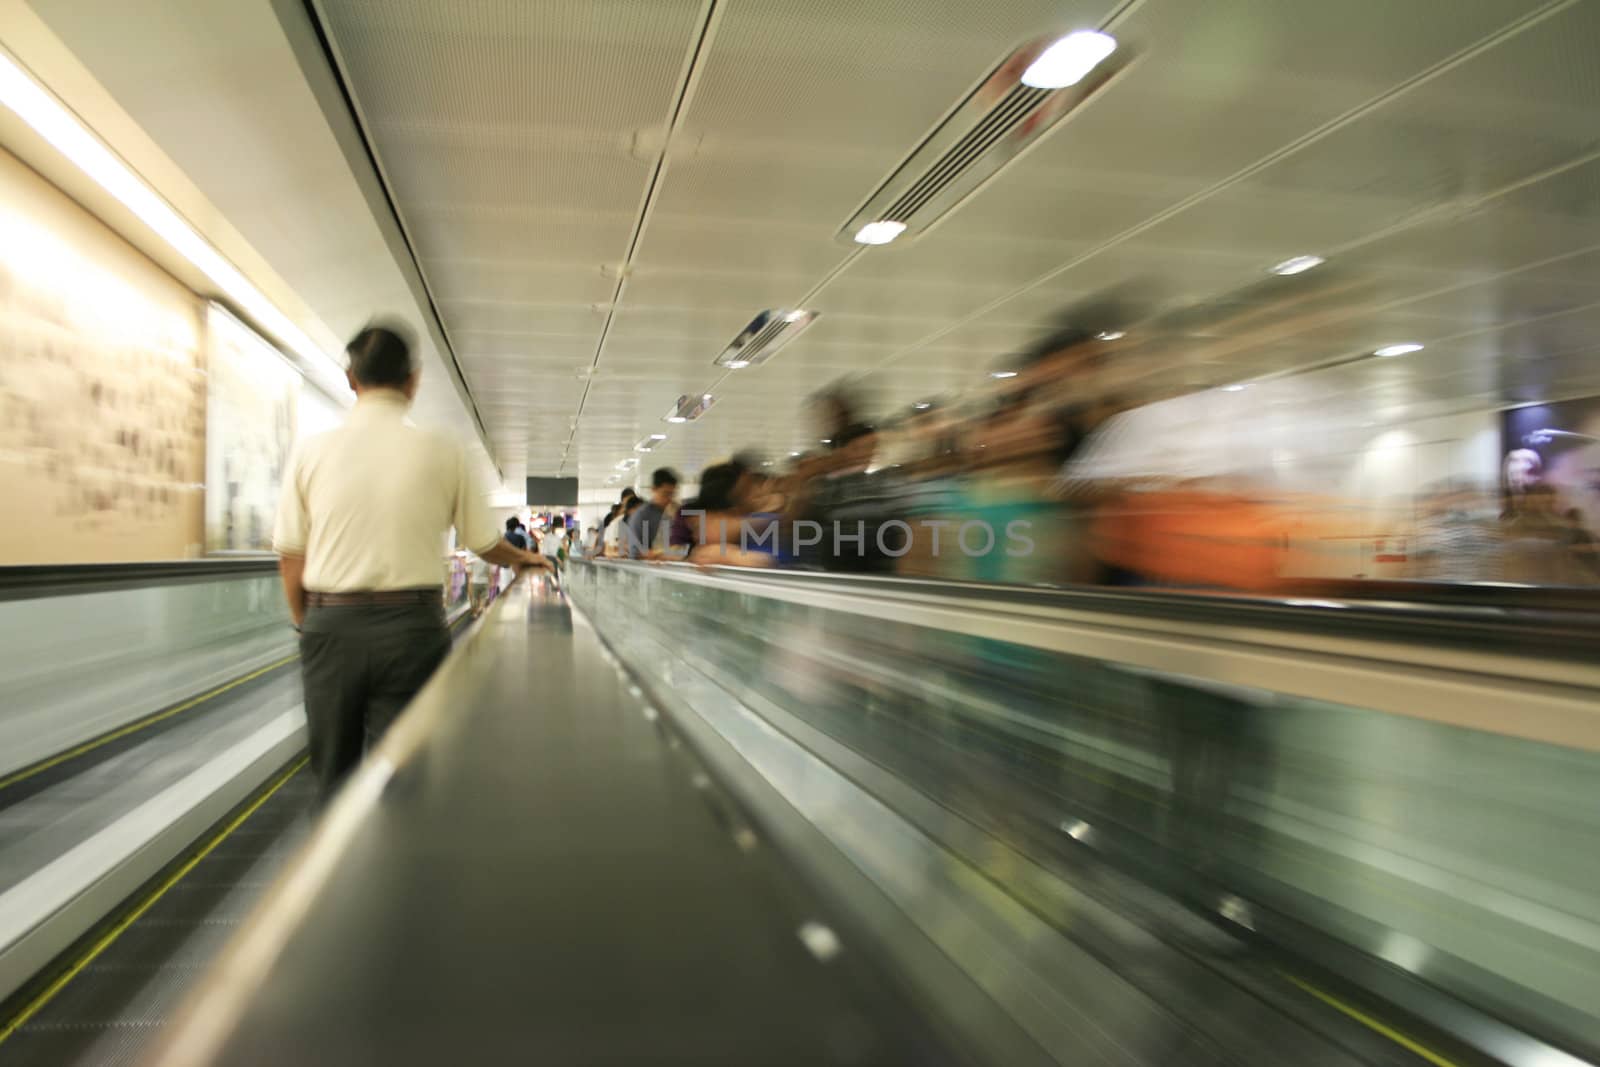 An moving escalator create and motion blur effect.